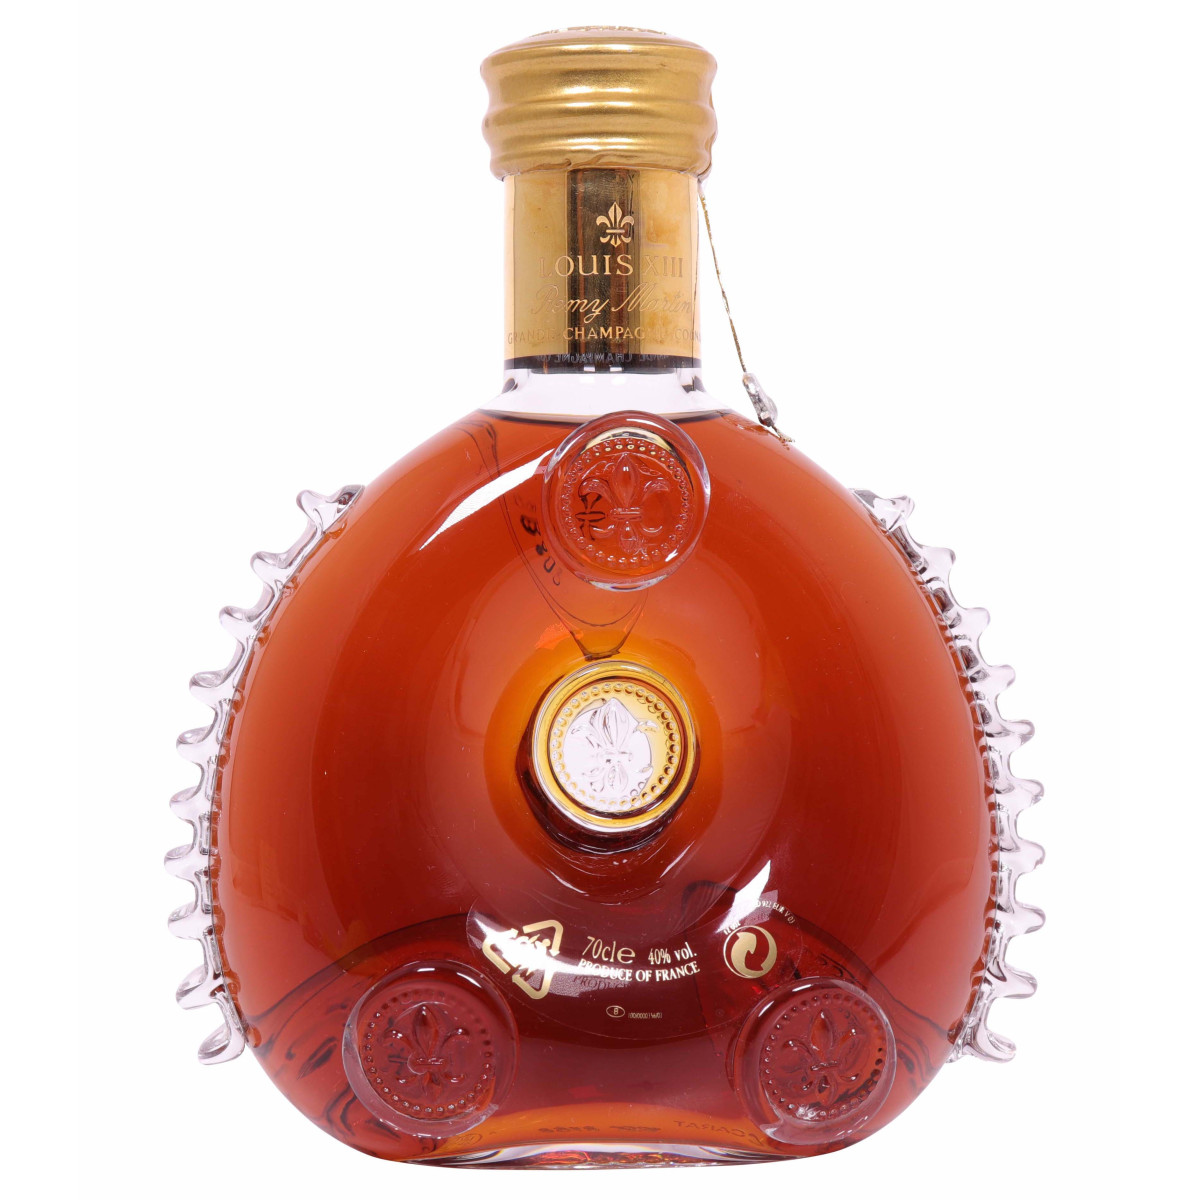 Remy Martin Louis XIII Grande Champagne Cognac Decanter With